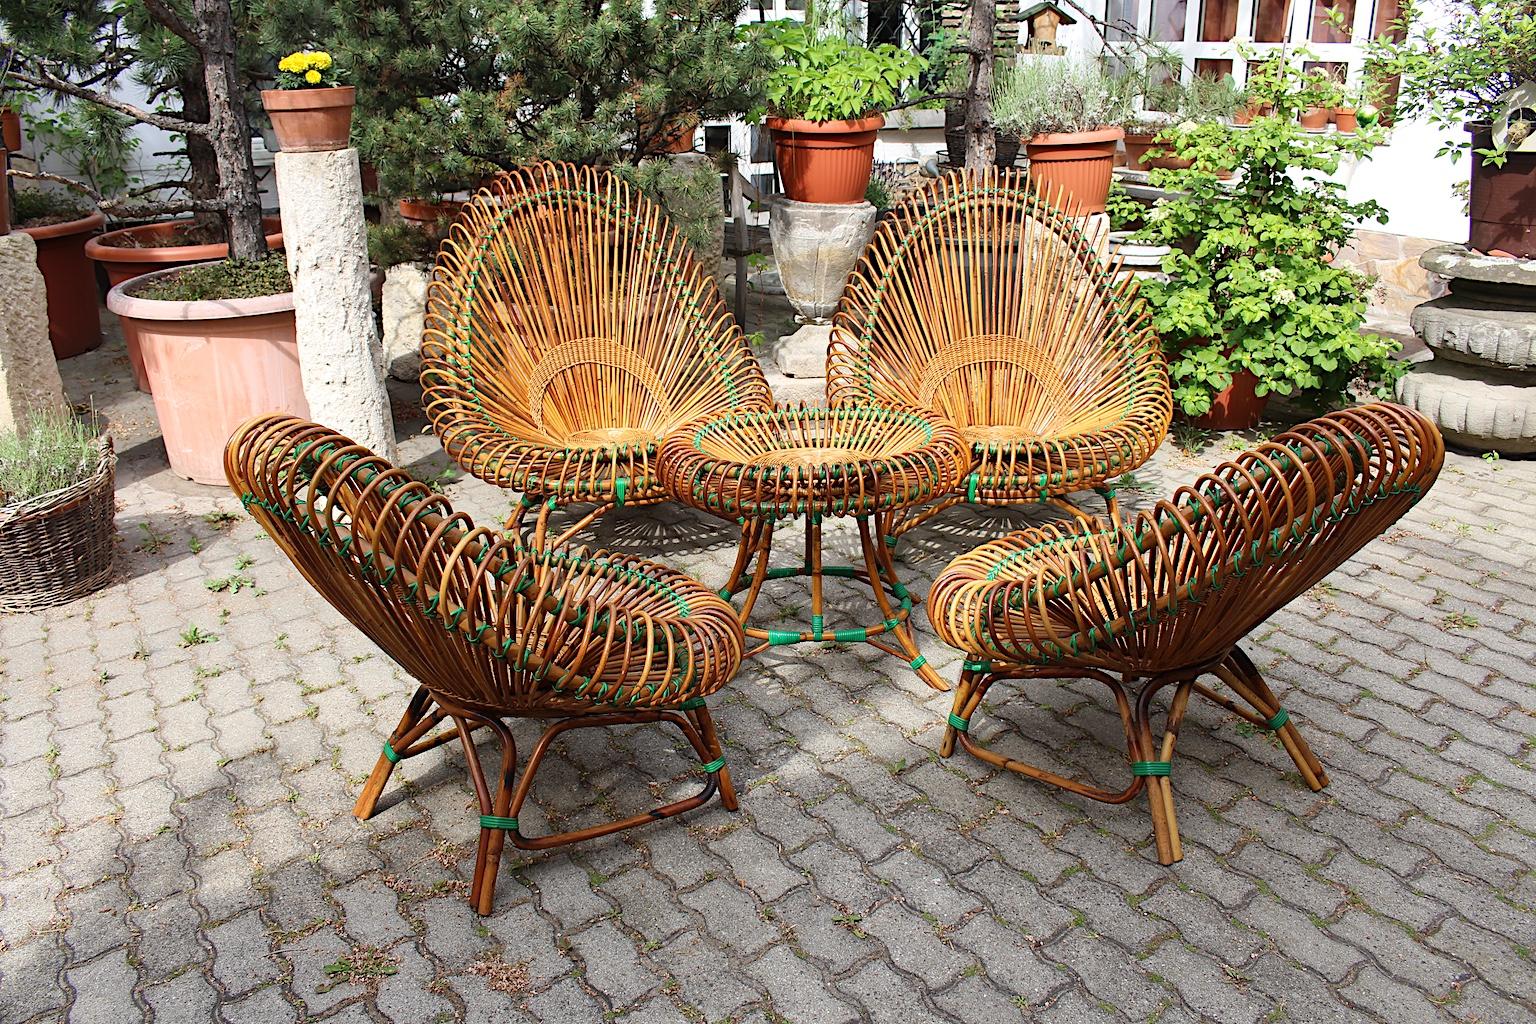 A Mid-Century Modern rattan garden furniture set by Janine Abraham and Dirk Jan Rol, which is very rare and shows a complete set. The living room set consists of four rattan lounge chairs in two different sizes, maybe for gents and ladies, and one